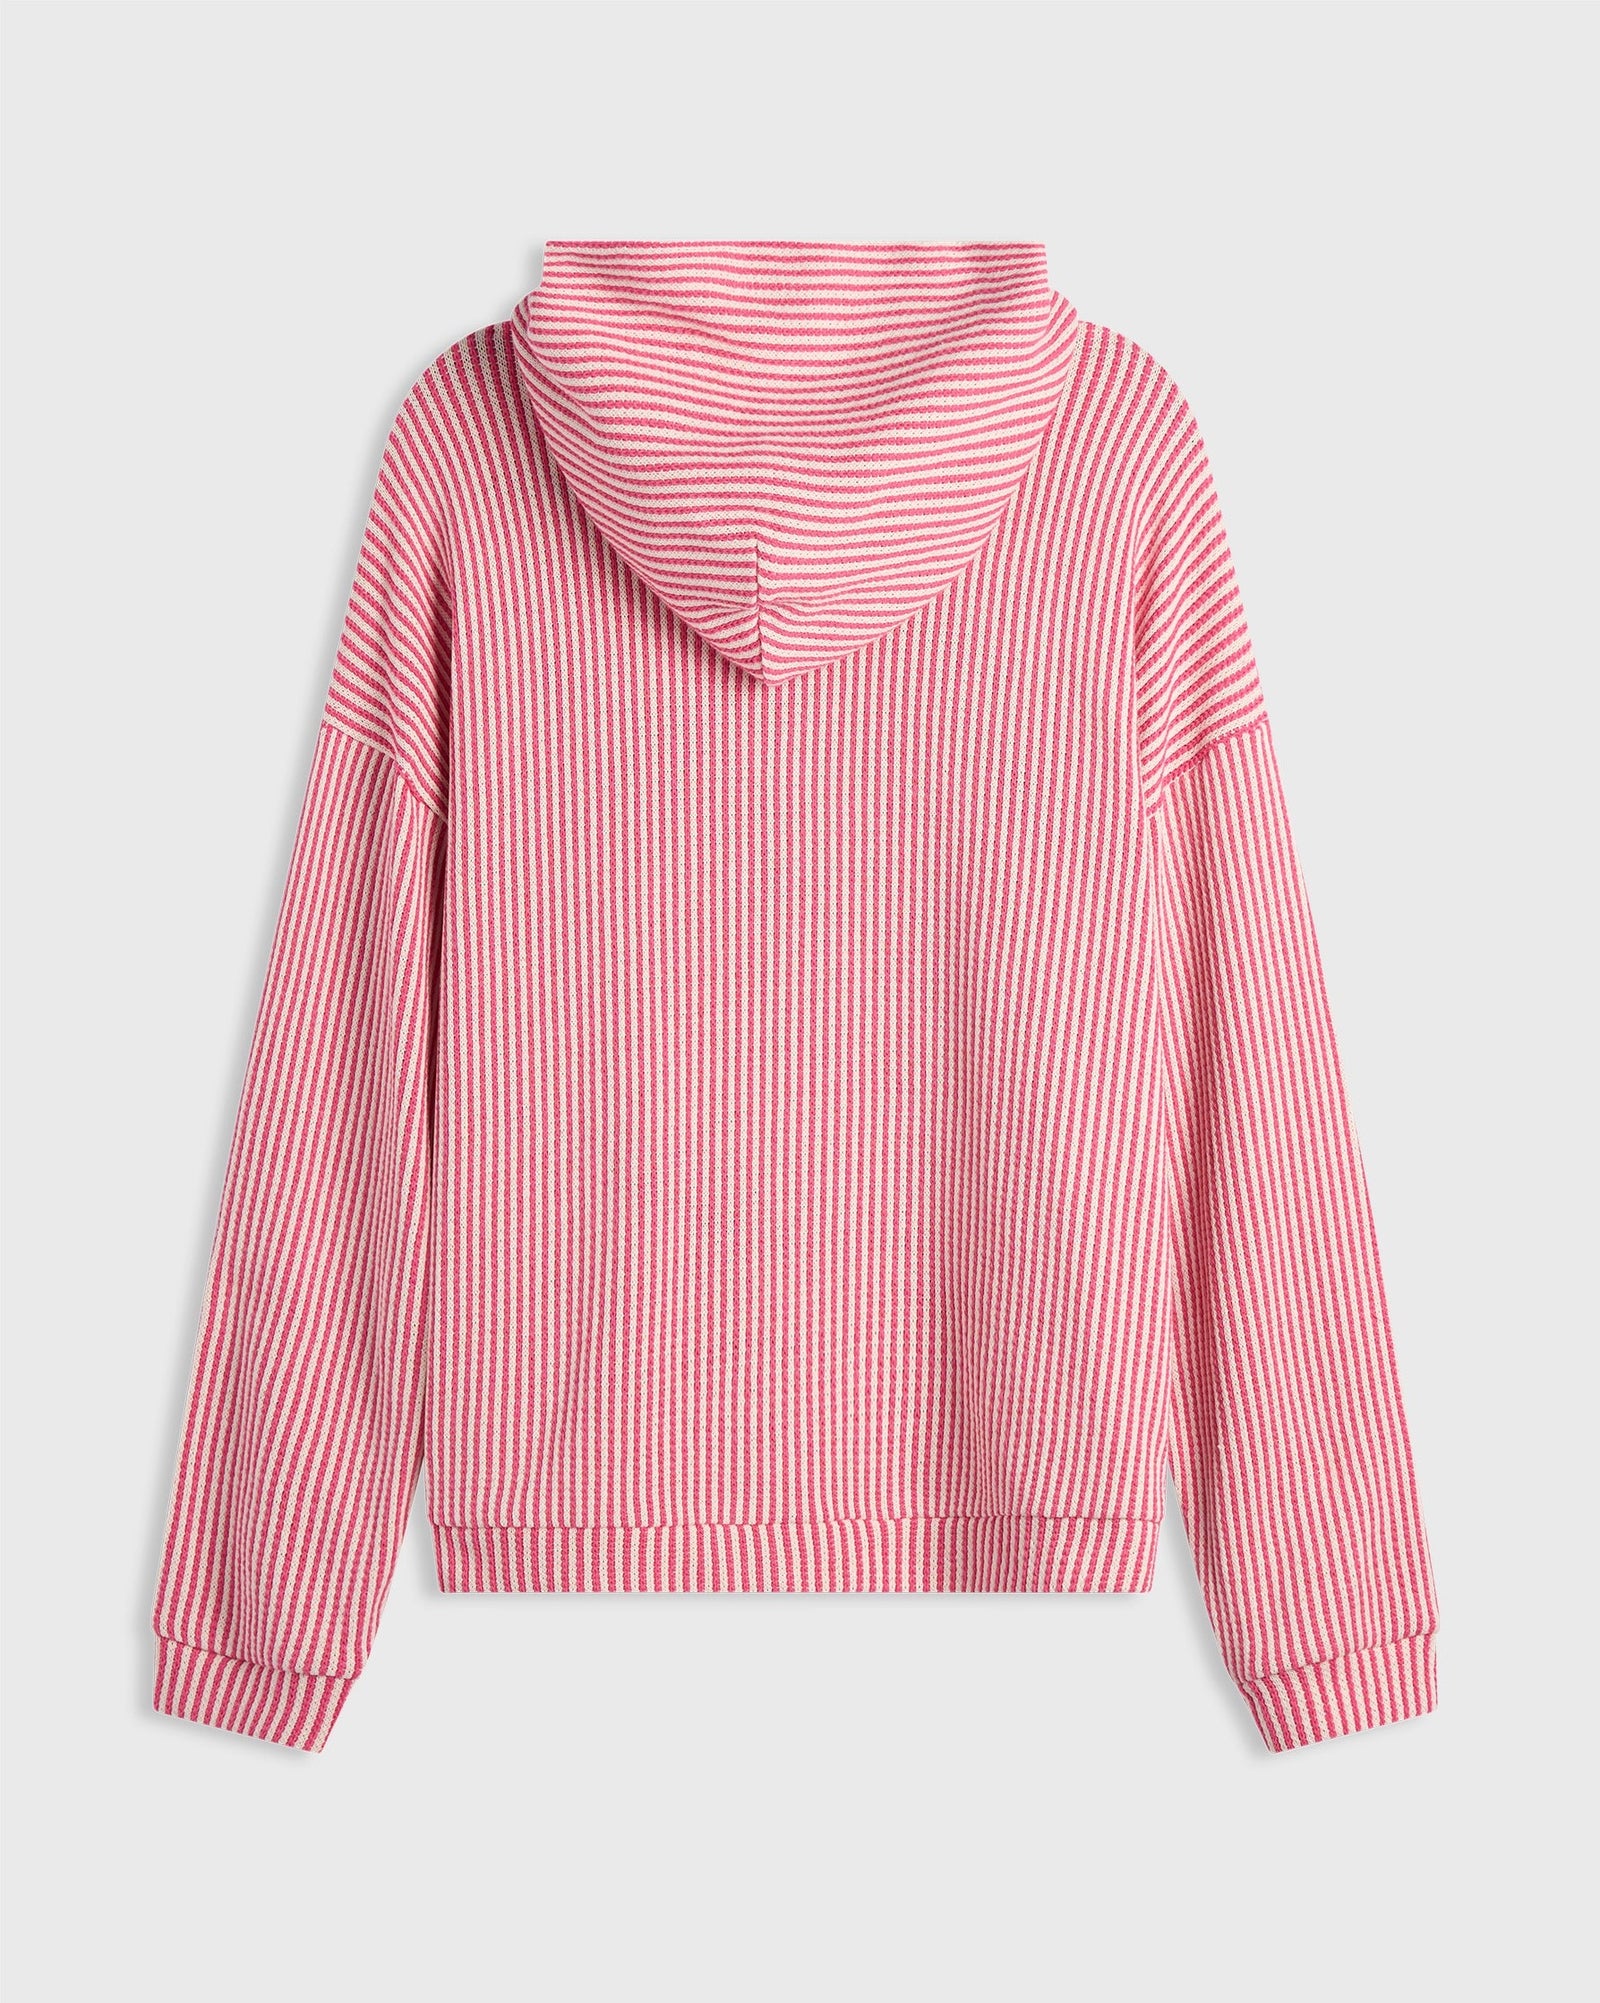 Pink and Red Striped zip up hoodie - unisex fashion hoodies for men & women by Krost